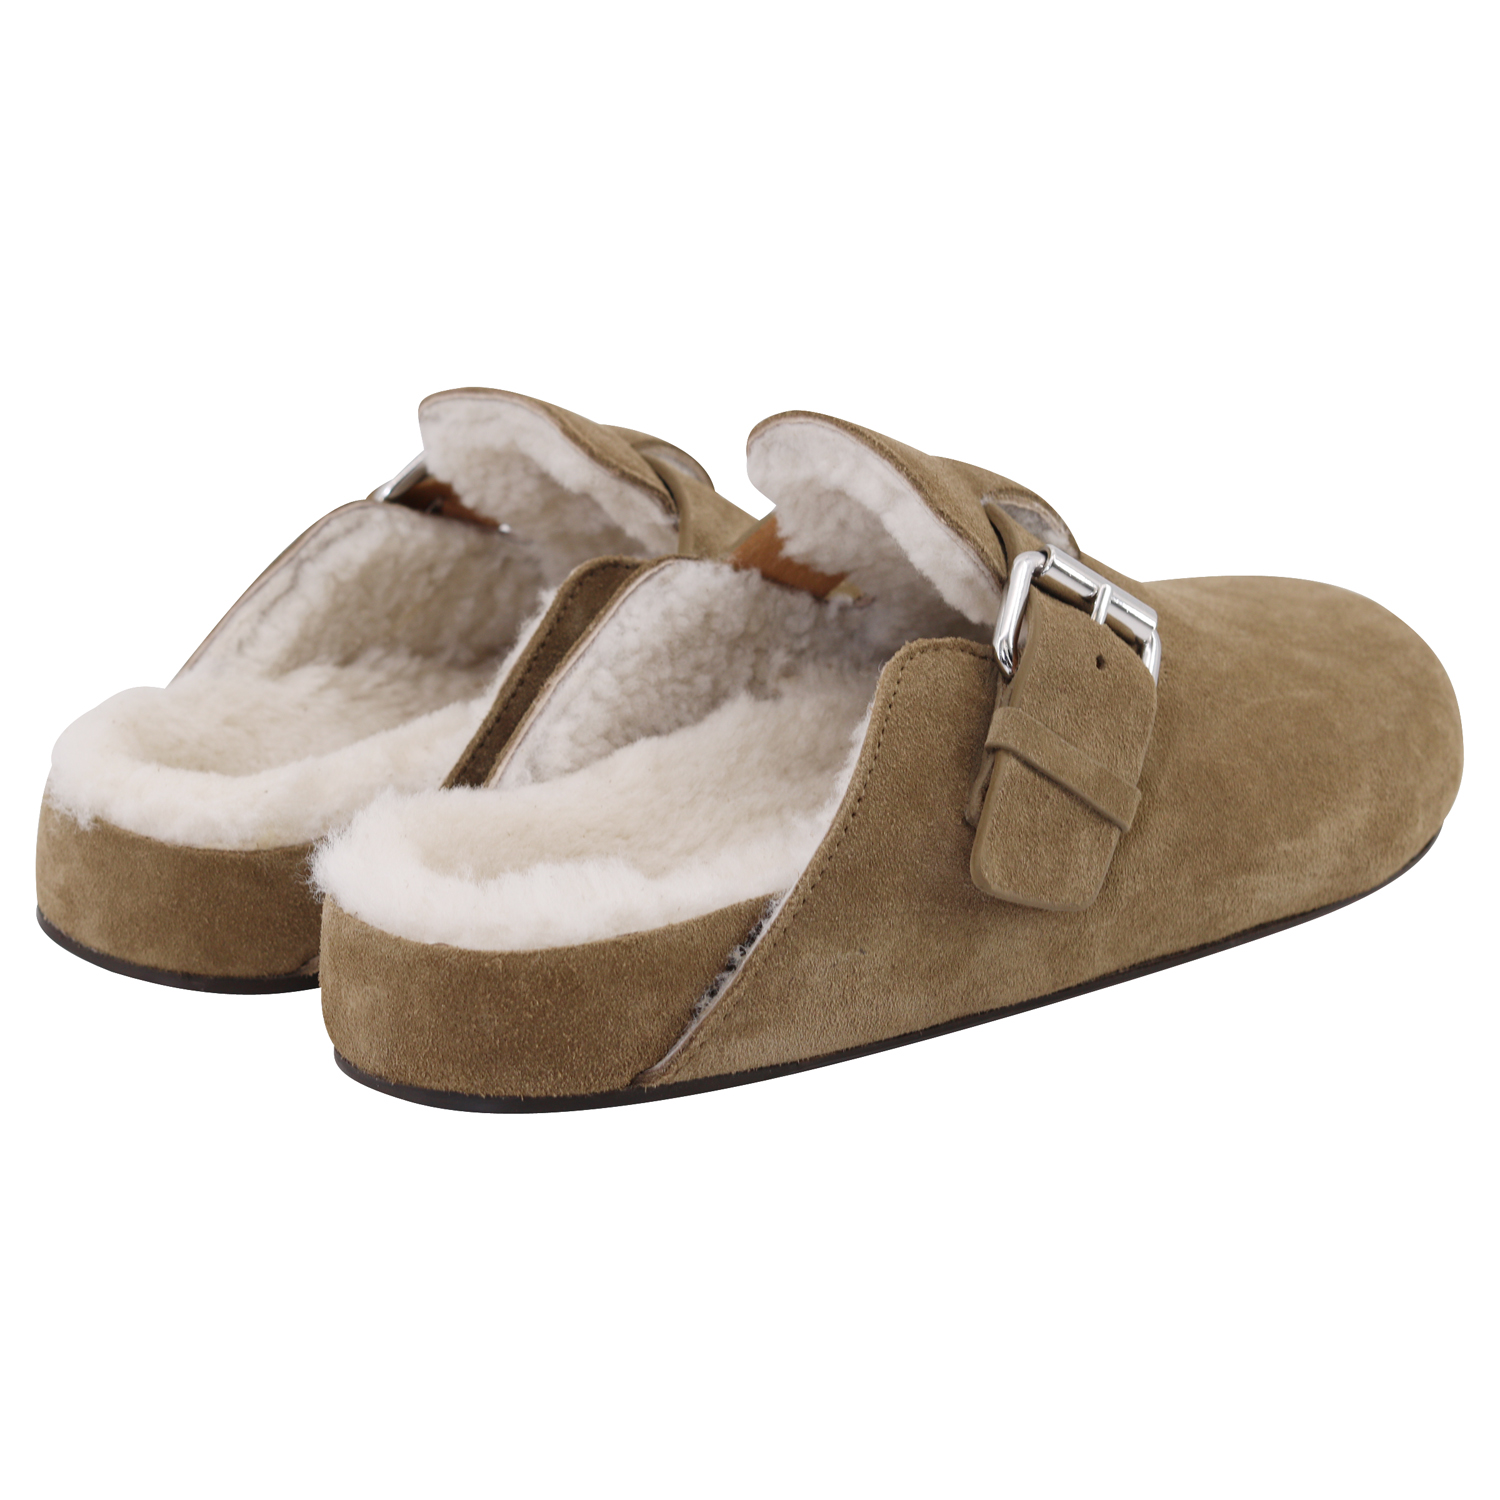 Isabel Marant Shearling Sandals Mirvin Taupe Suede 40